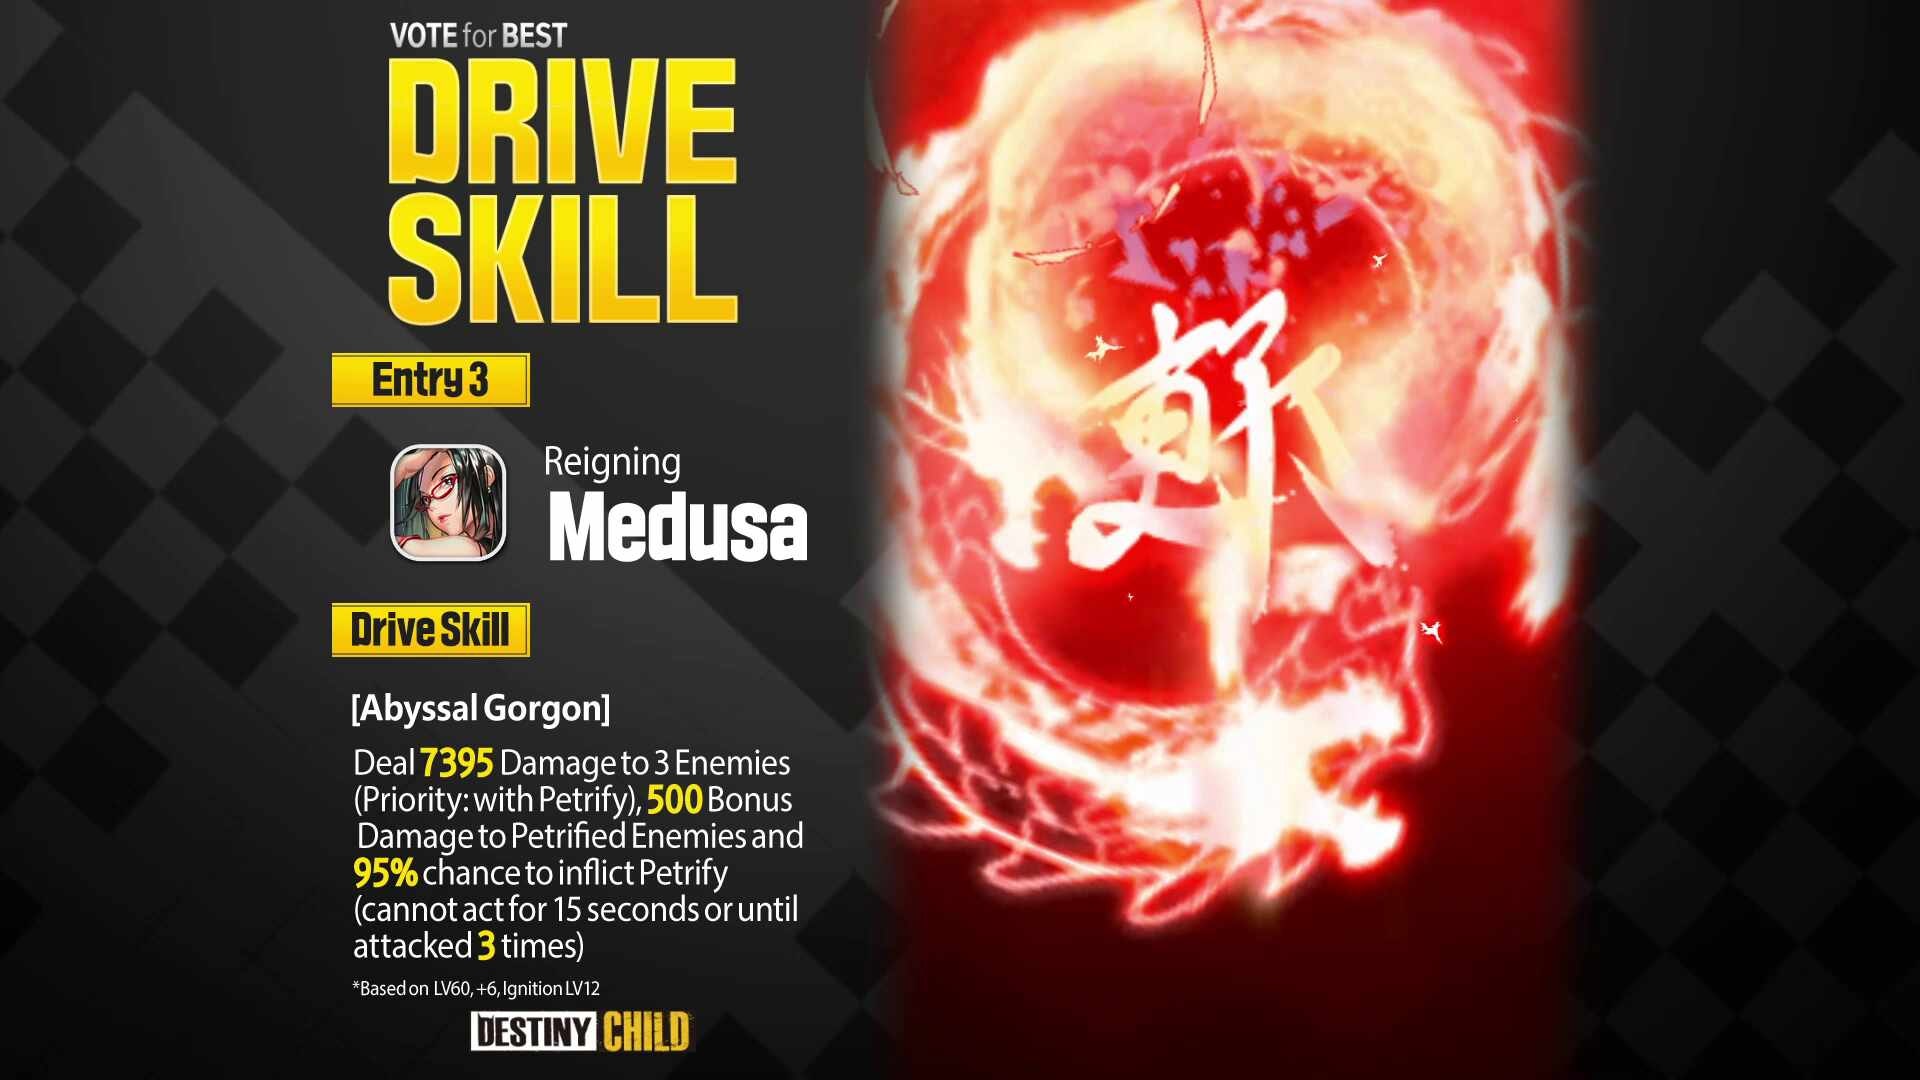 DESTINY CHILD: PAST NEWS - [EVENT] Vote for Best Drive Skill  video cover image 2